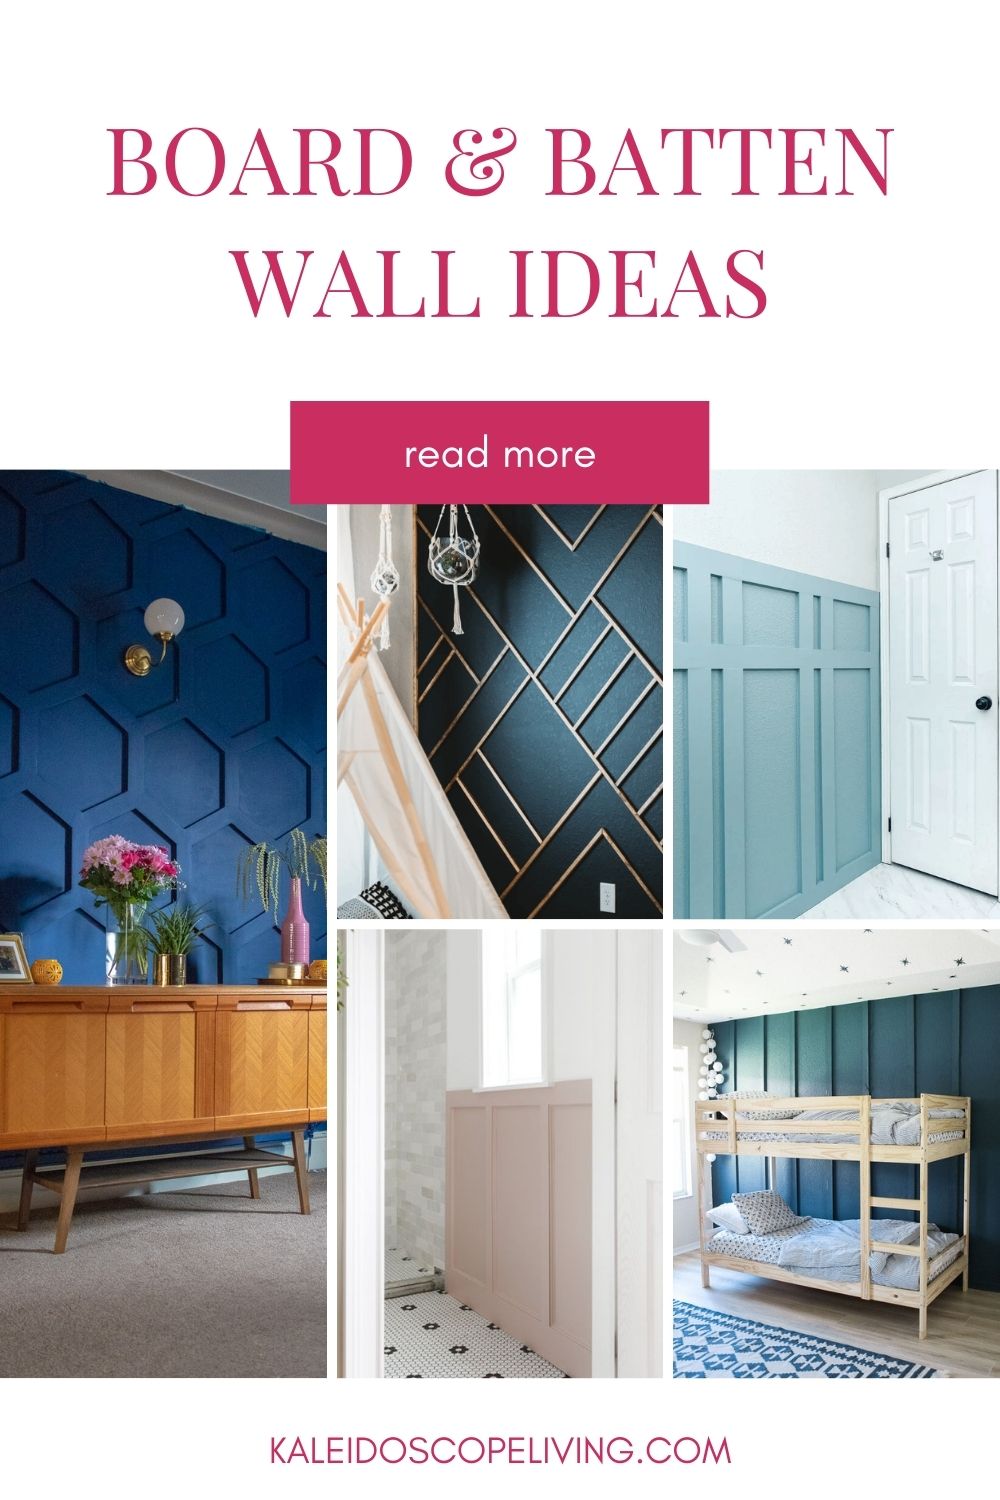 dress up your room with board and batten wall ideas